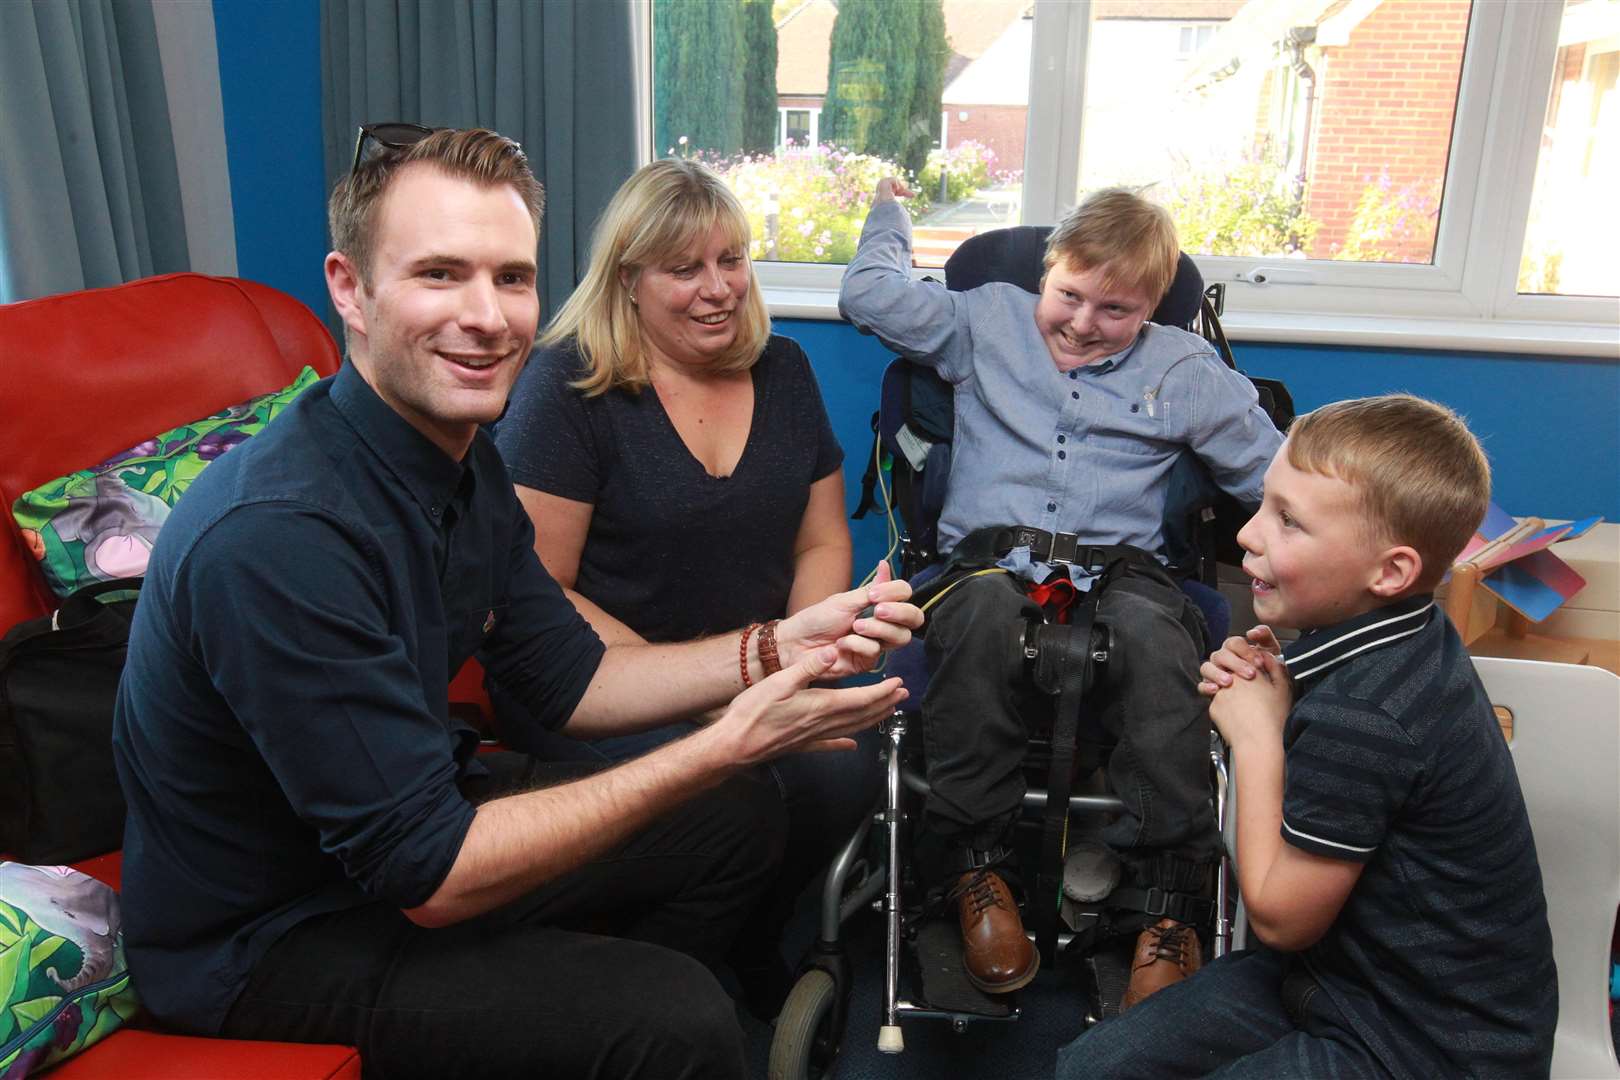 From left, Richard Jones winner of Britain's Got Talent, a couple of years ago, shows Carla Iles and her two sons, James Iles, 14 and Max Phillip, seven, a magic trick during the show for children and family at Demelza Hospice Care for Children. Picture by: John Westhrop (5050877)